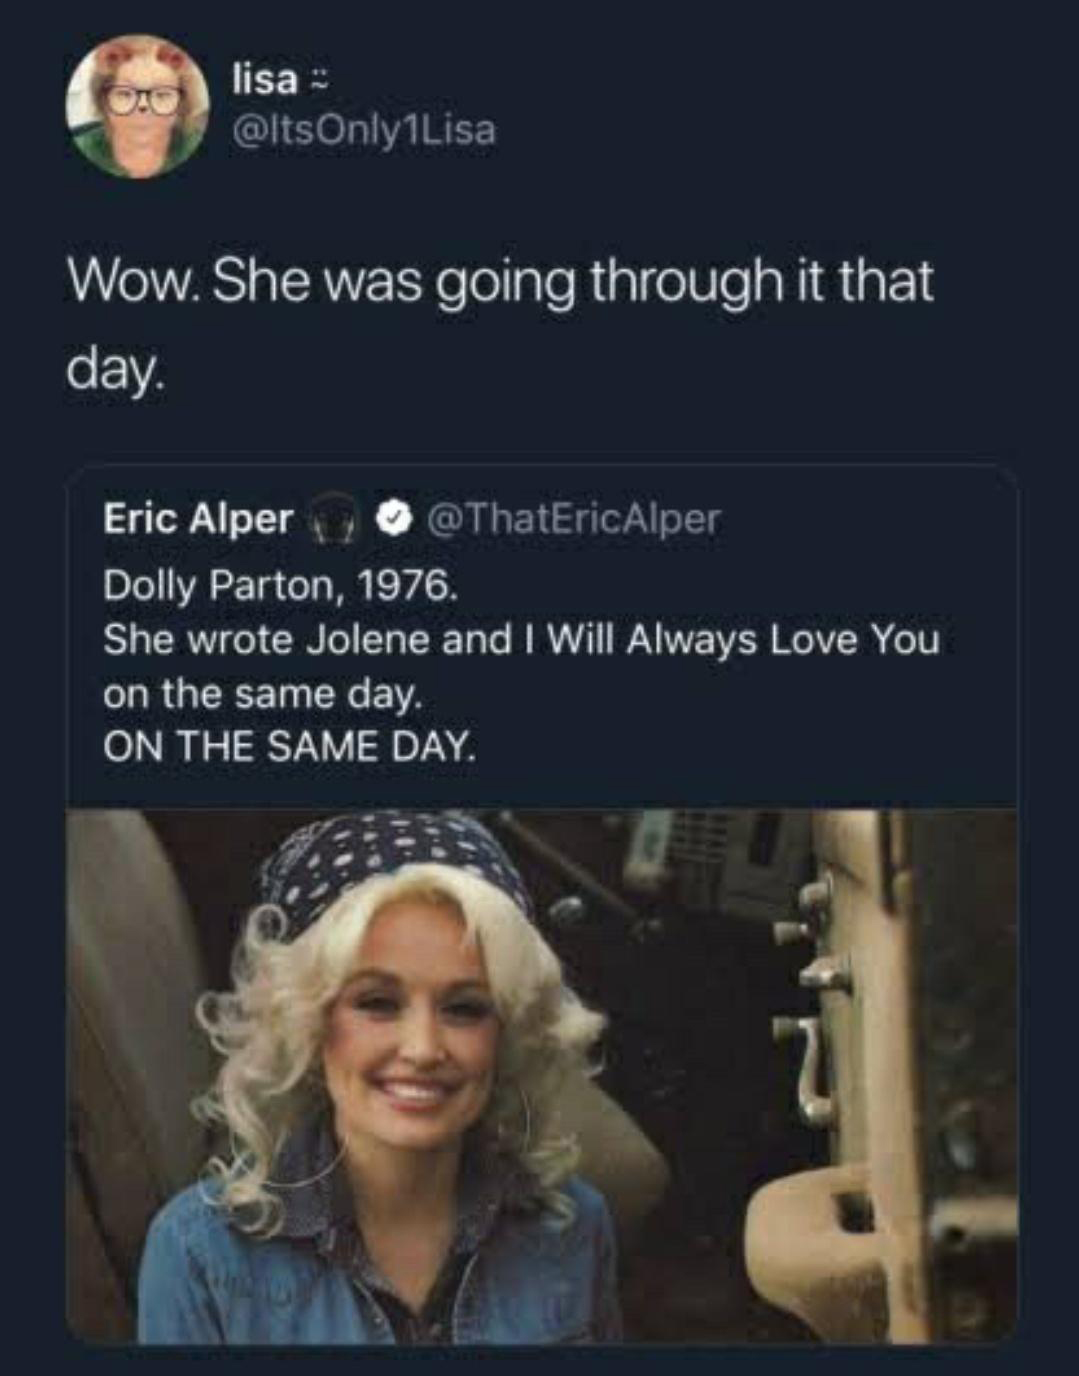 funny tweets - dolly parton jolene i will always love you - lisa > Only1Lisa Wow. She was going through it that day. Eric Alper Dolly Parton, 1976. She wrote Jolene and I Will Always Love You on the same day. On The Same Day.